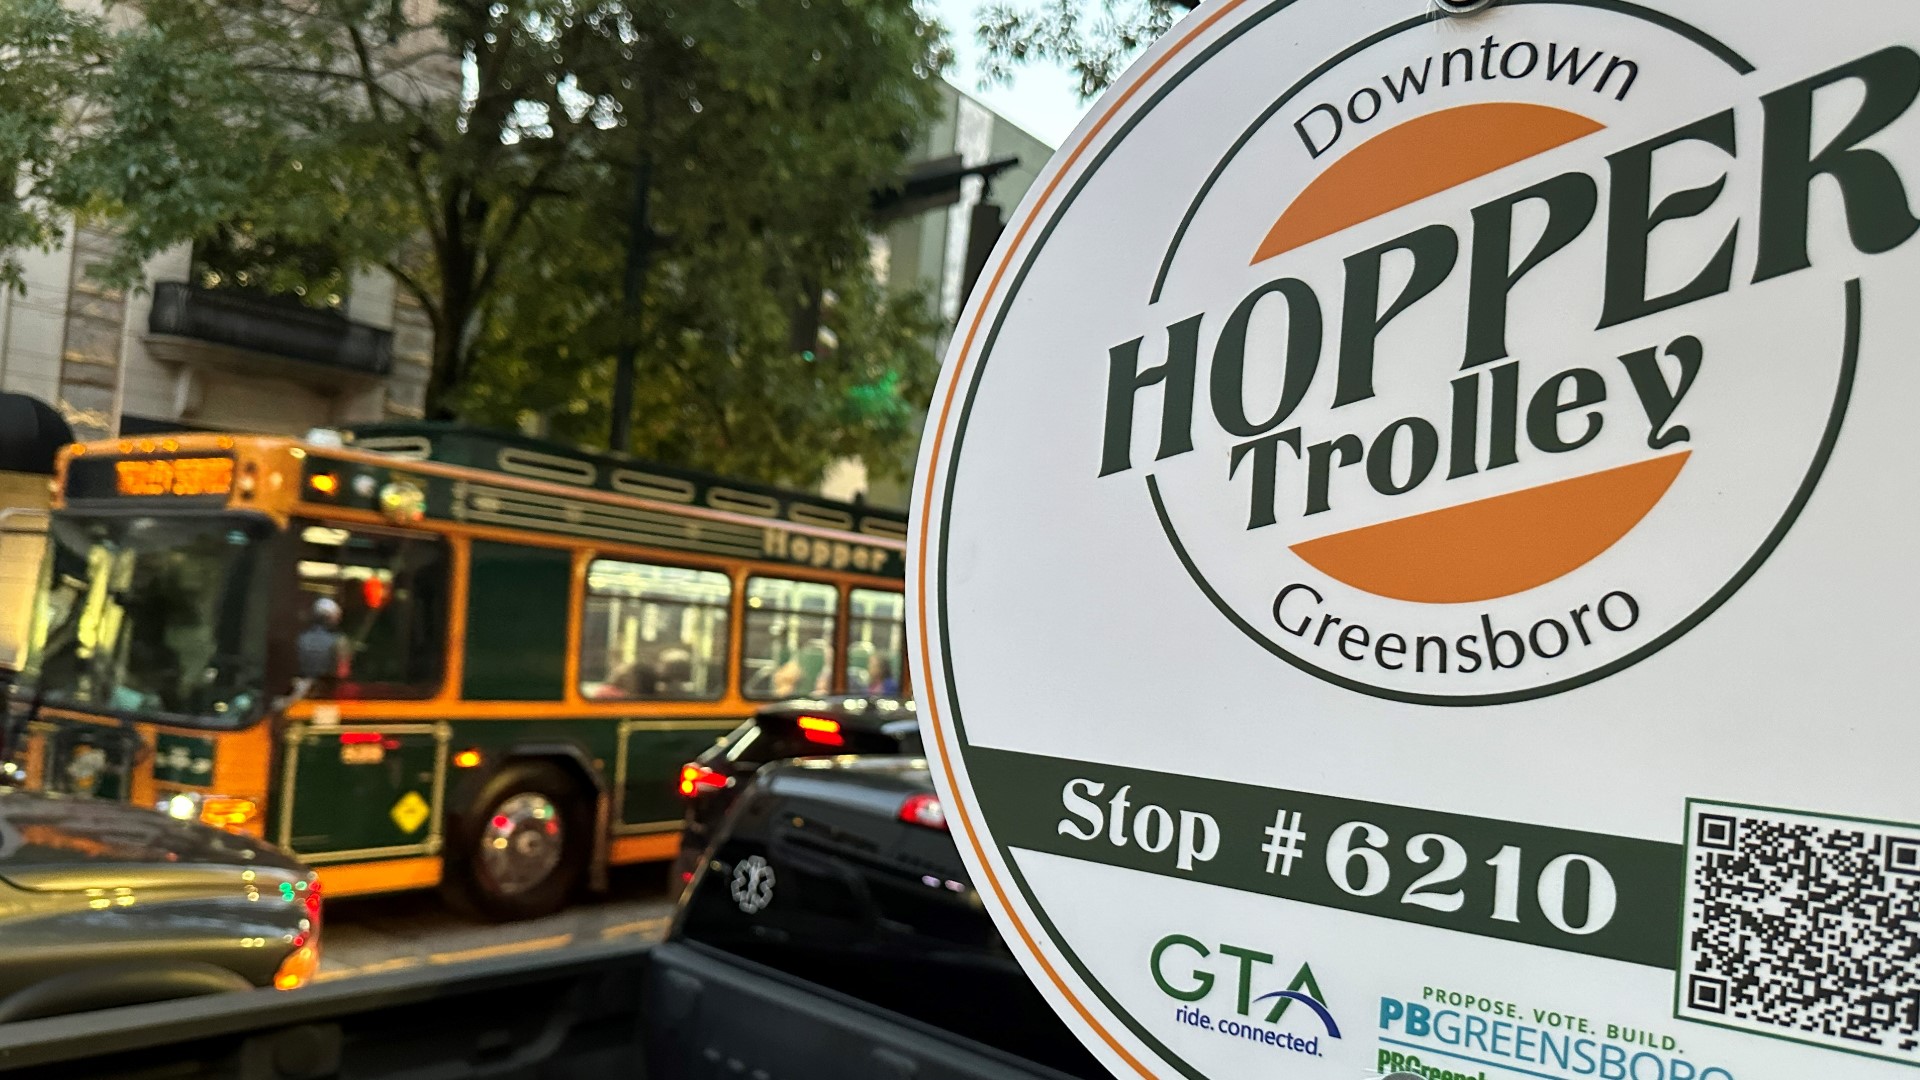 The Hopper faced its first weekend rush. People said they hope the trolley becomes a mainstay.